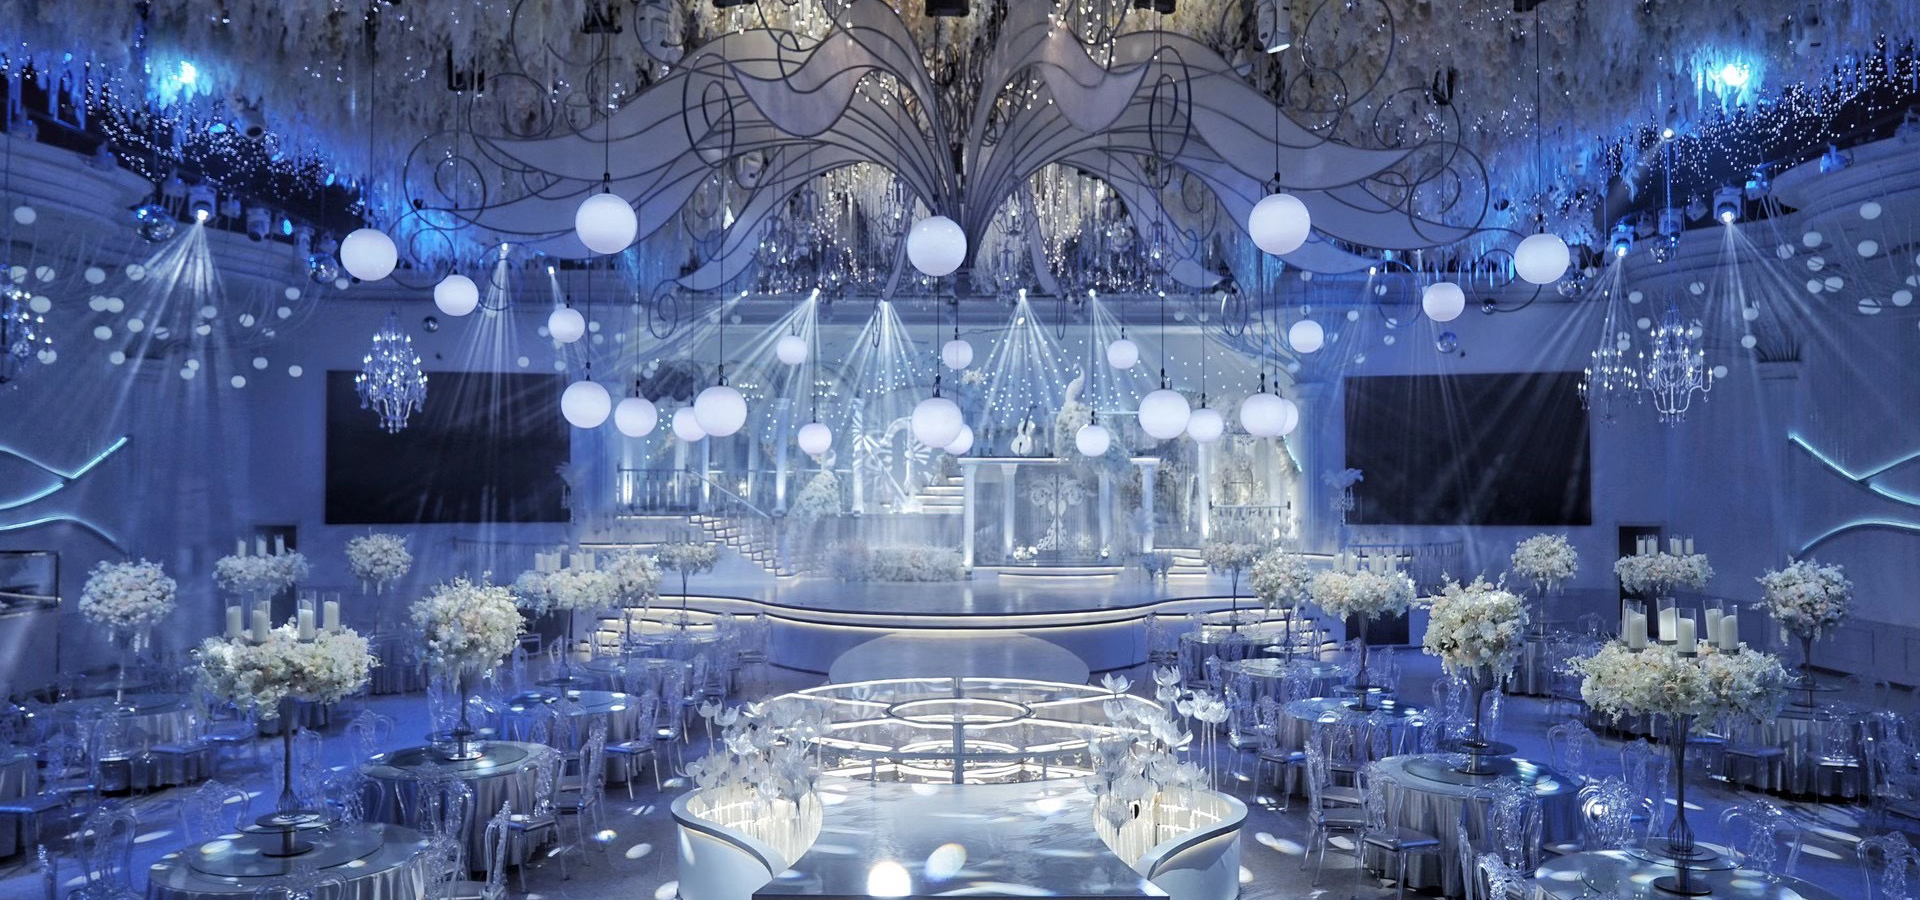 The kinetic sphere made a stunning appearance in the wedding hall